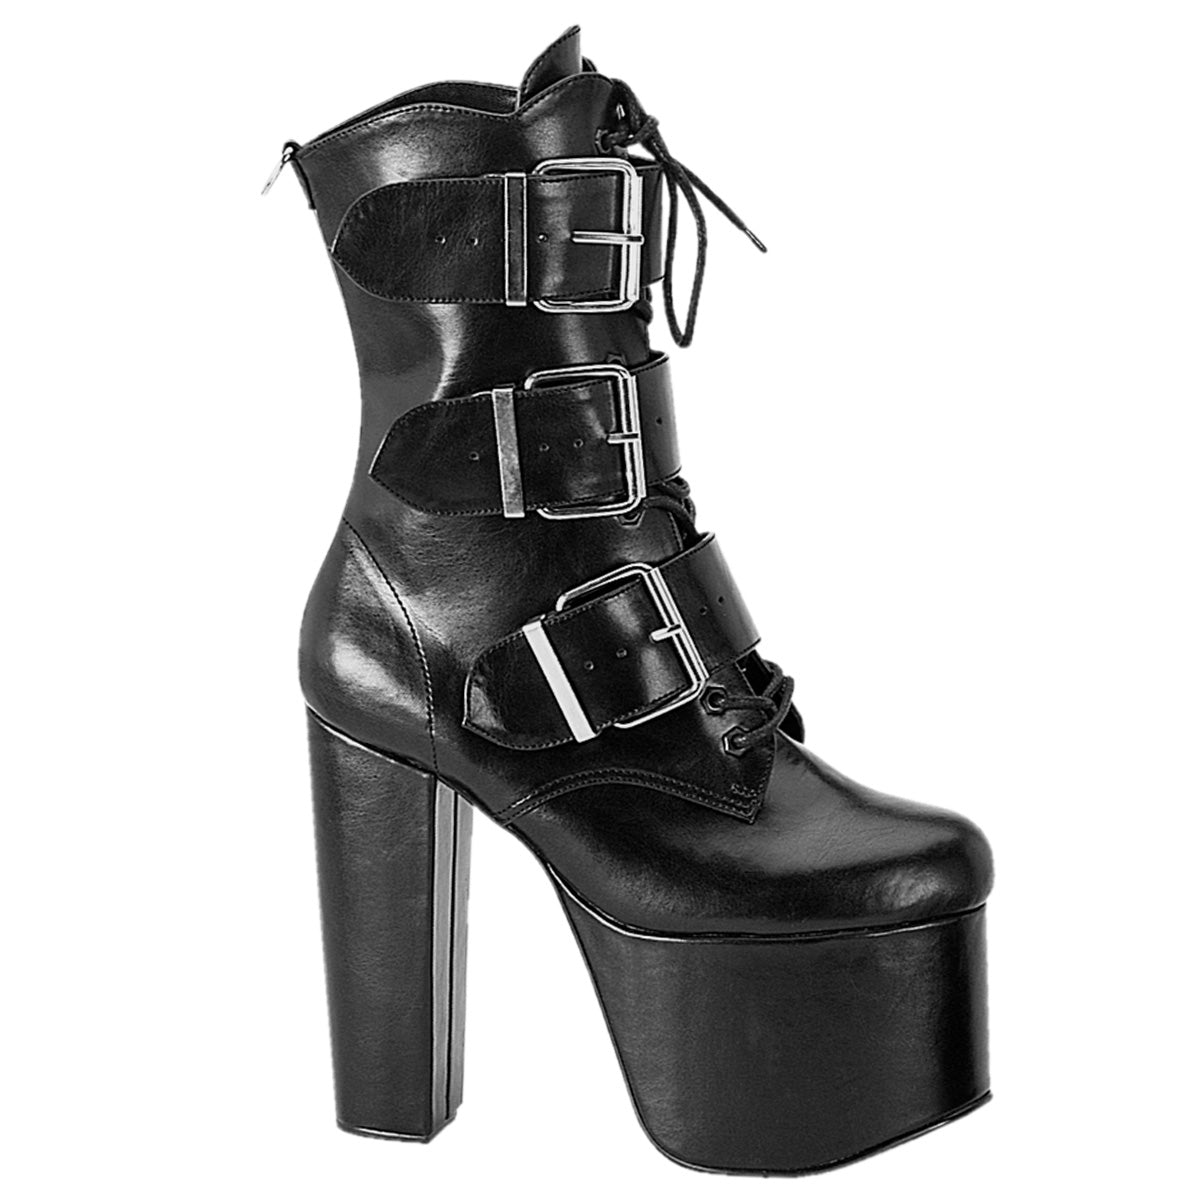 TORMENT-703 Ankle Boots by Demonia